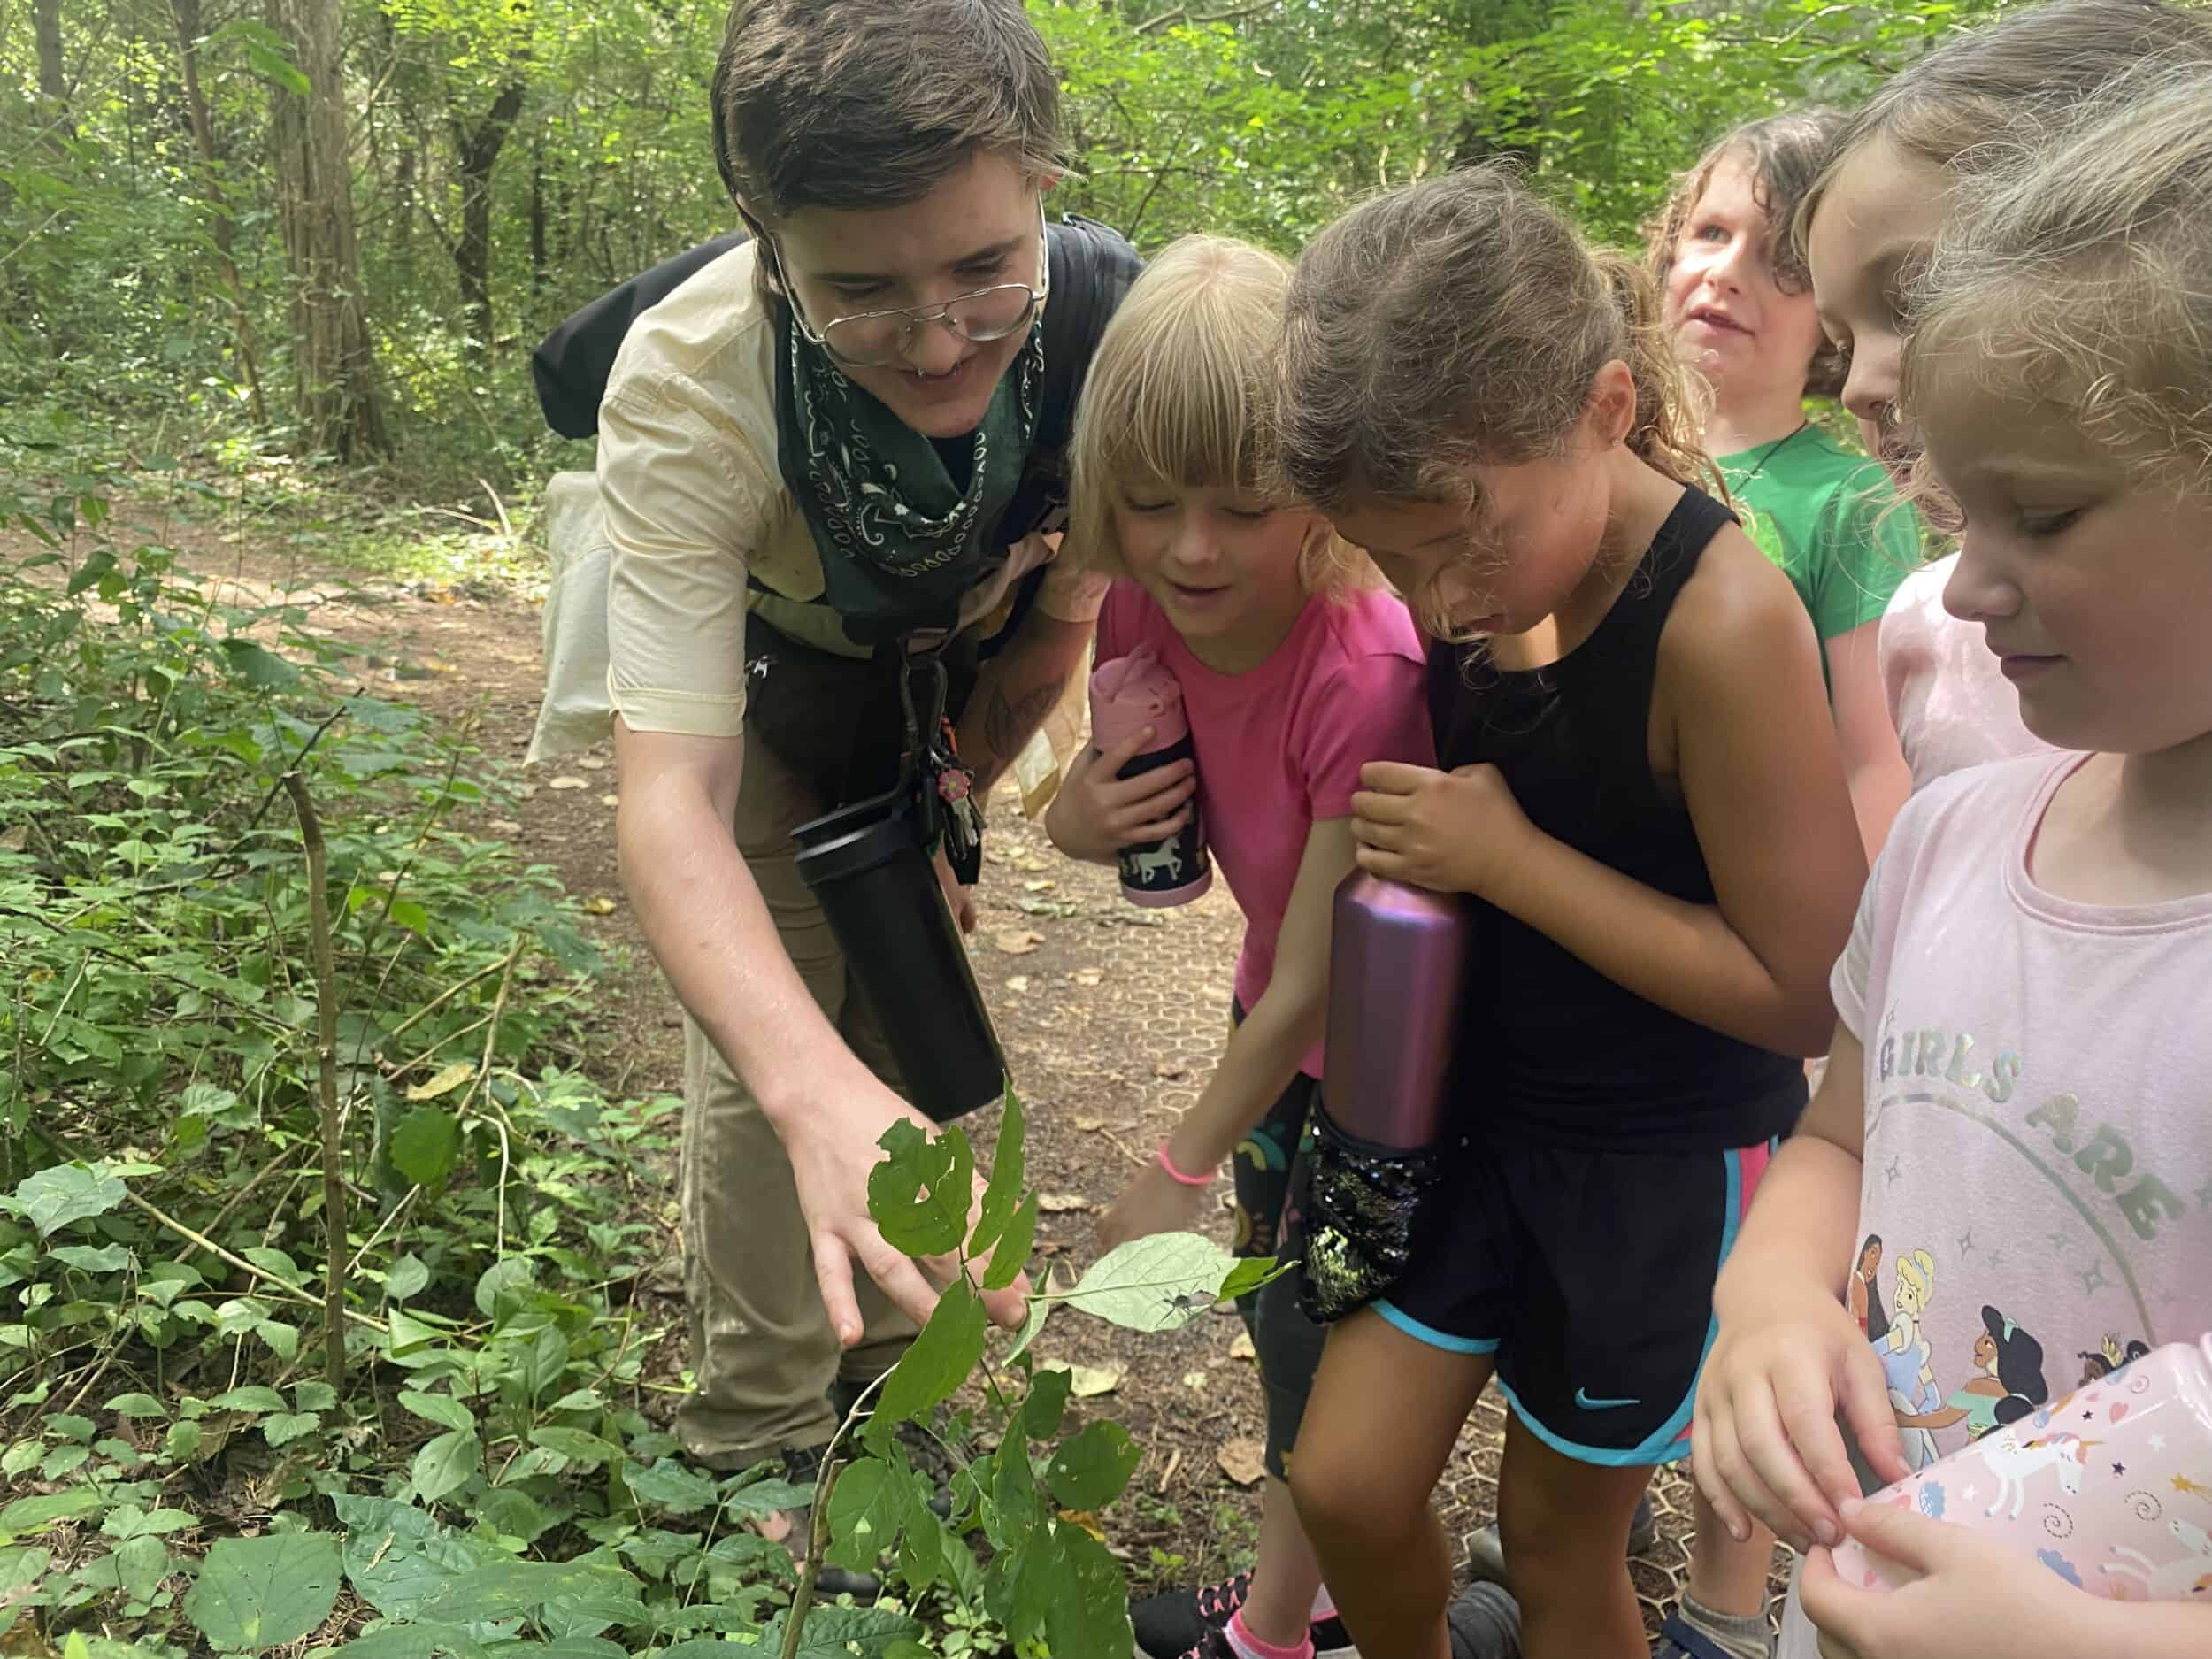 An adult is pointing out a spider on a leaf to 5 children who are leaning over to look at it. The forest behind them is green and they are in warm weather clothes, indicating that it is summer.